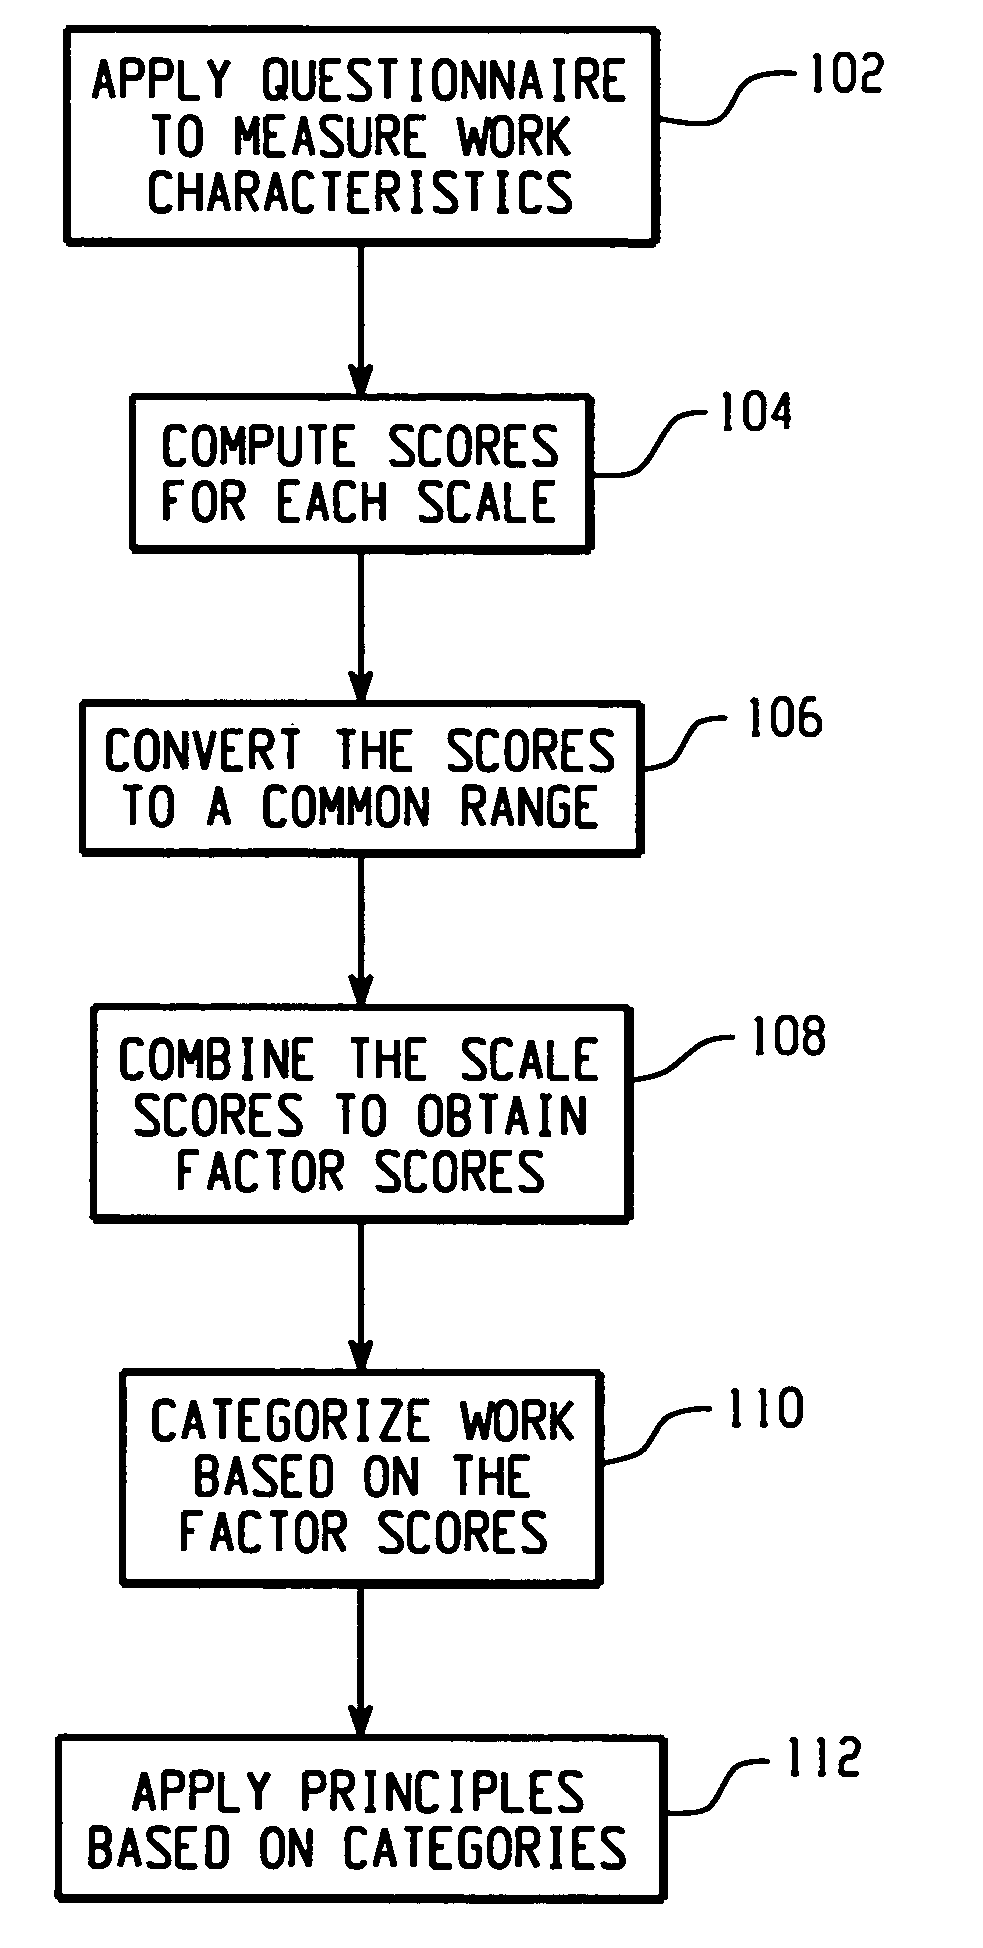 Categorizing work in a work system